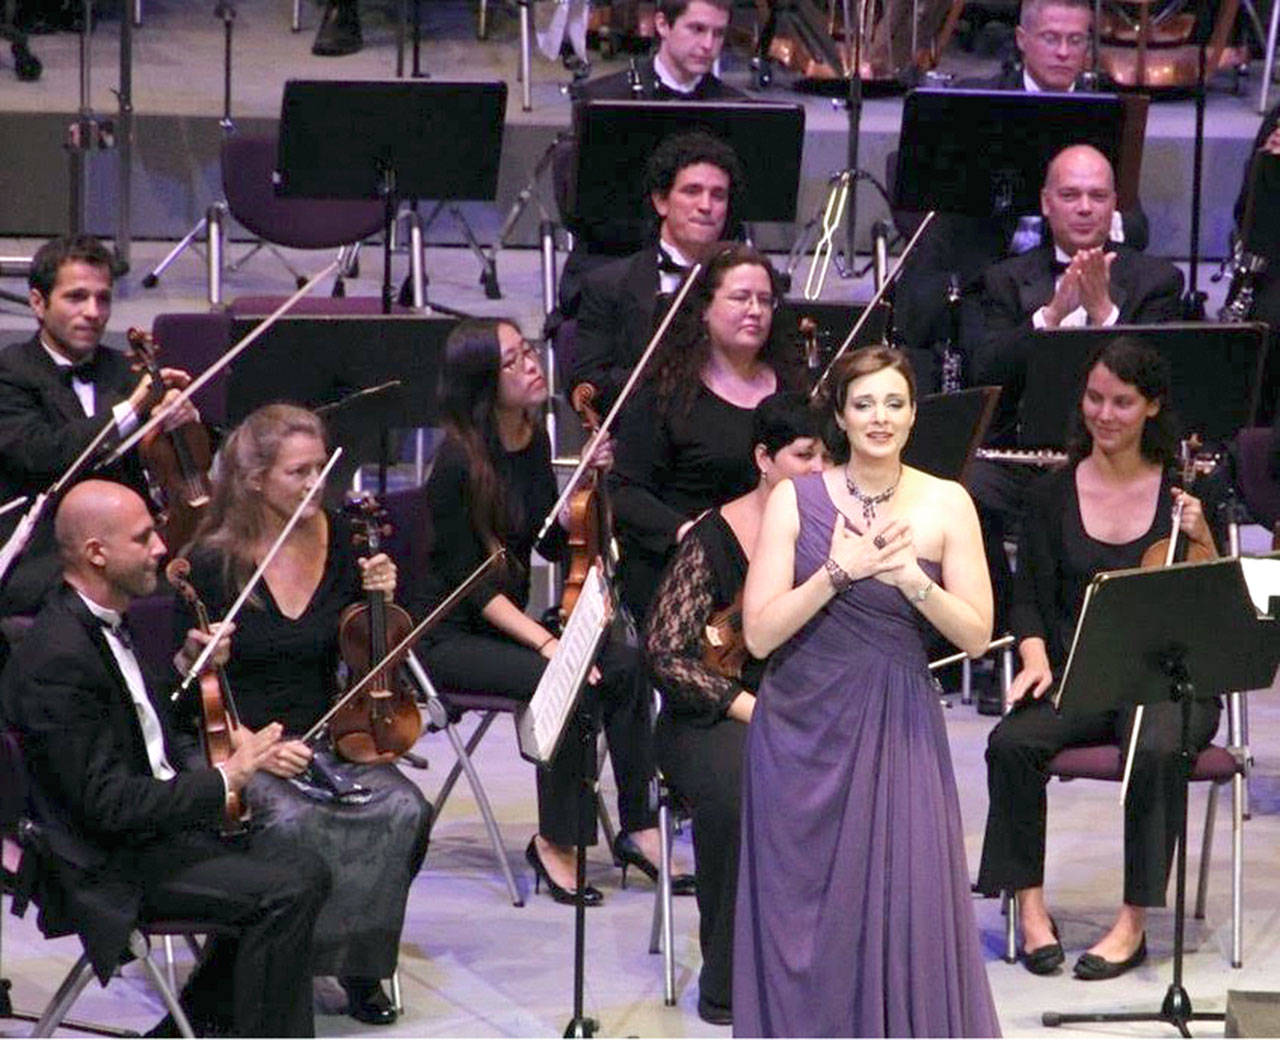 Soprano Kristin K. Vogel will offer a taste of opera in two Pops & Picnic concerts this week: Friday in Port Angeles and Saturday in Sequim. She is seen here with the orchestra in Graz, Austria. (Kristin Vogel)